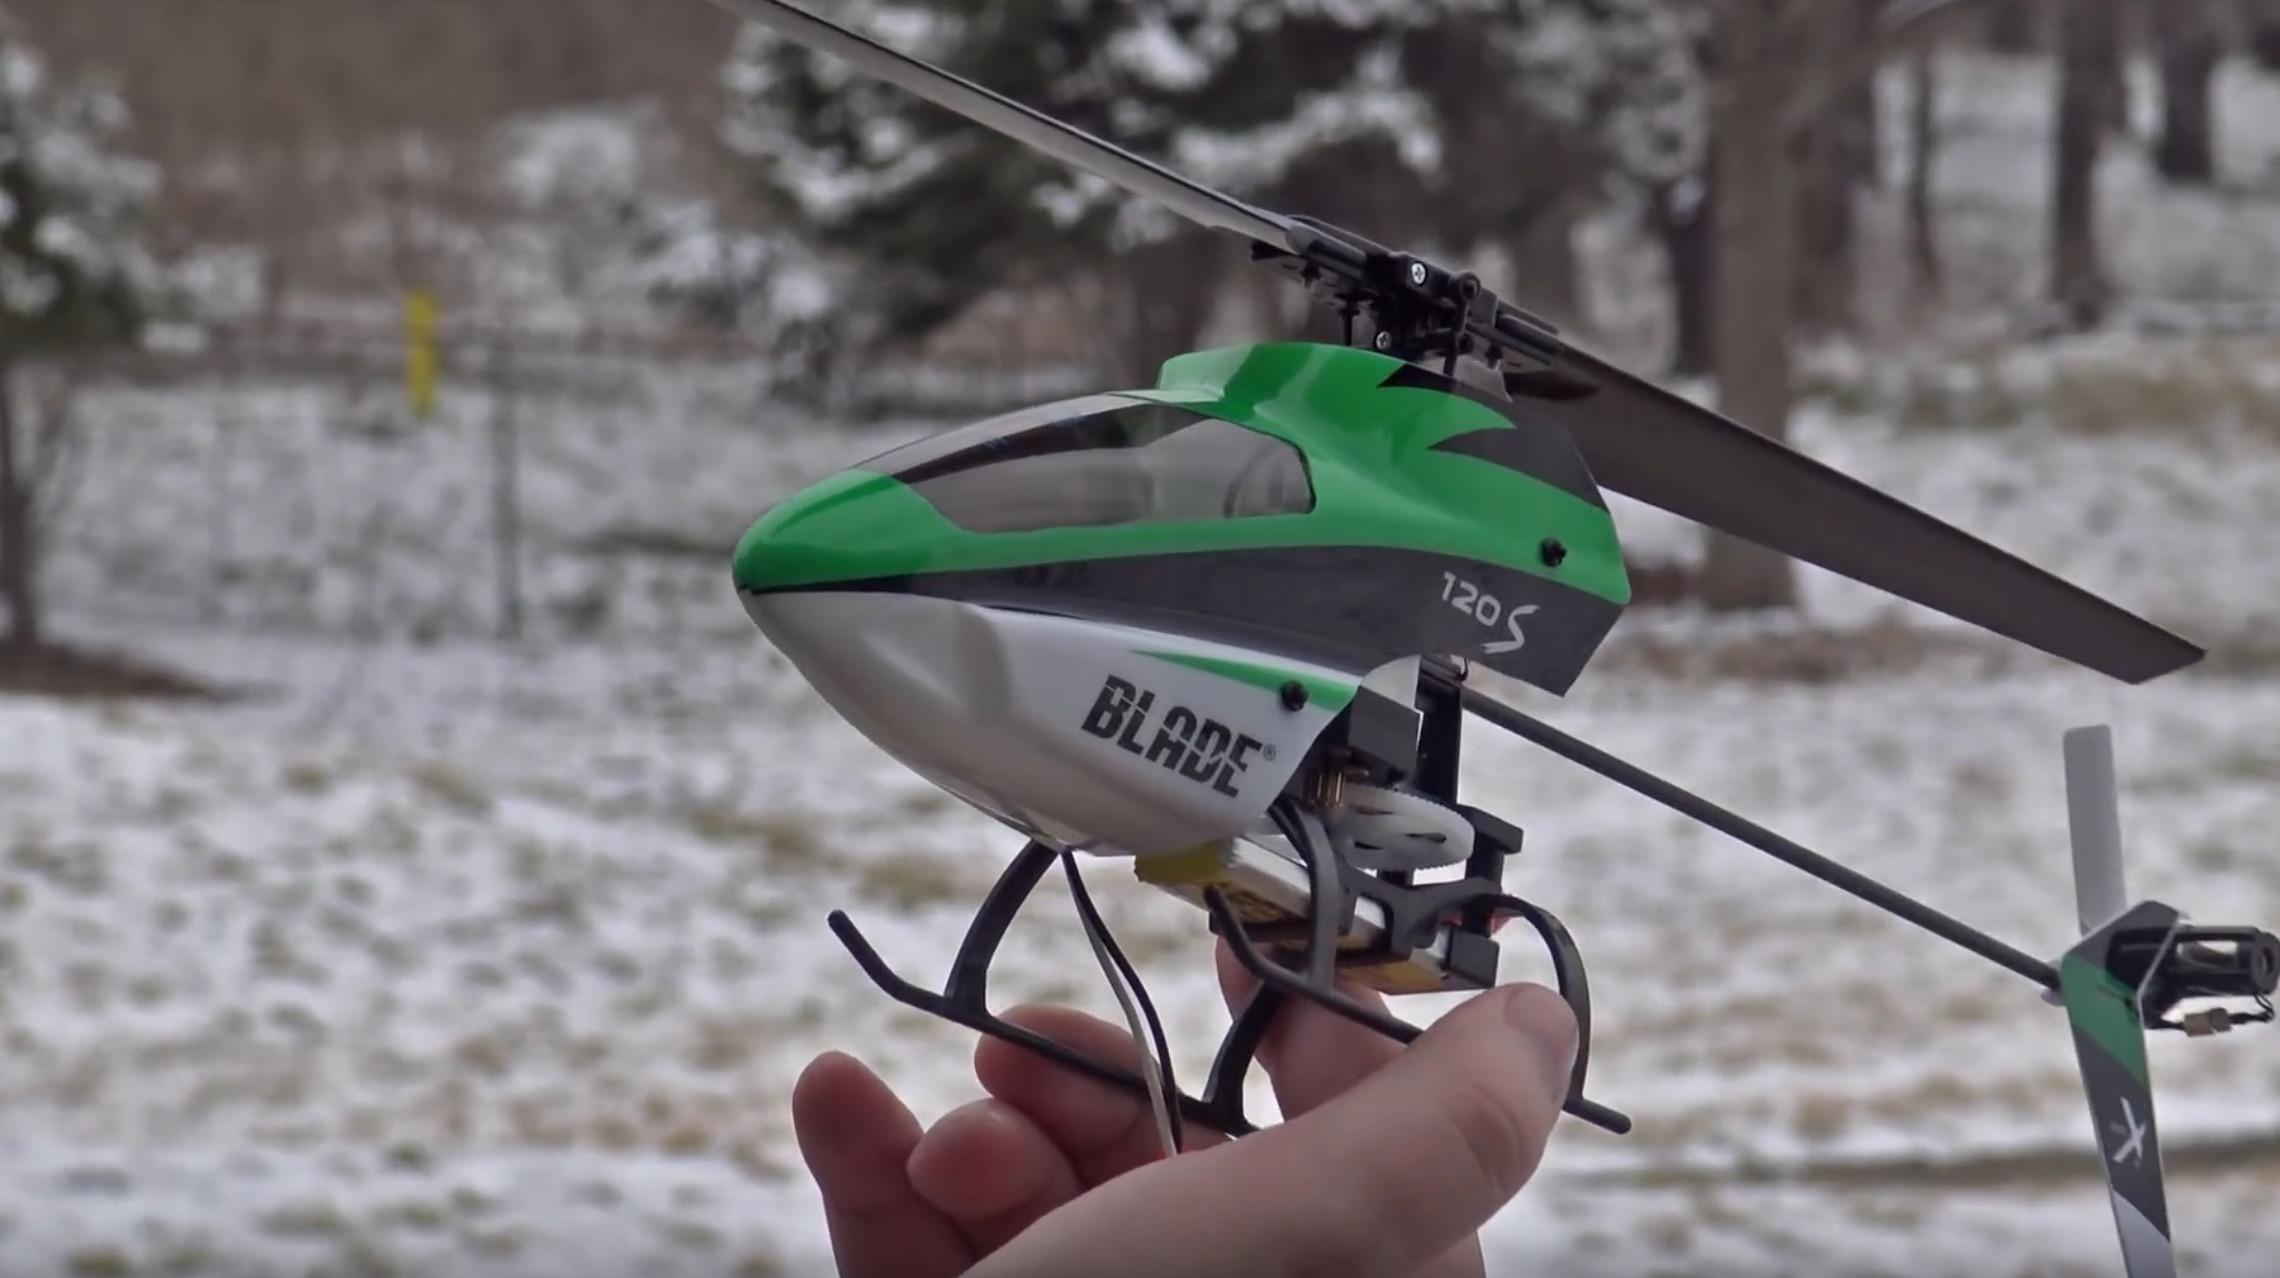 Blade 450 Helicopter: Effortless Setup and Usage for Beginners